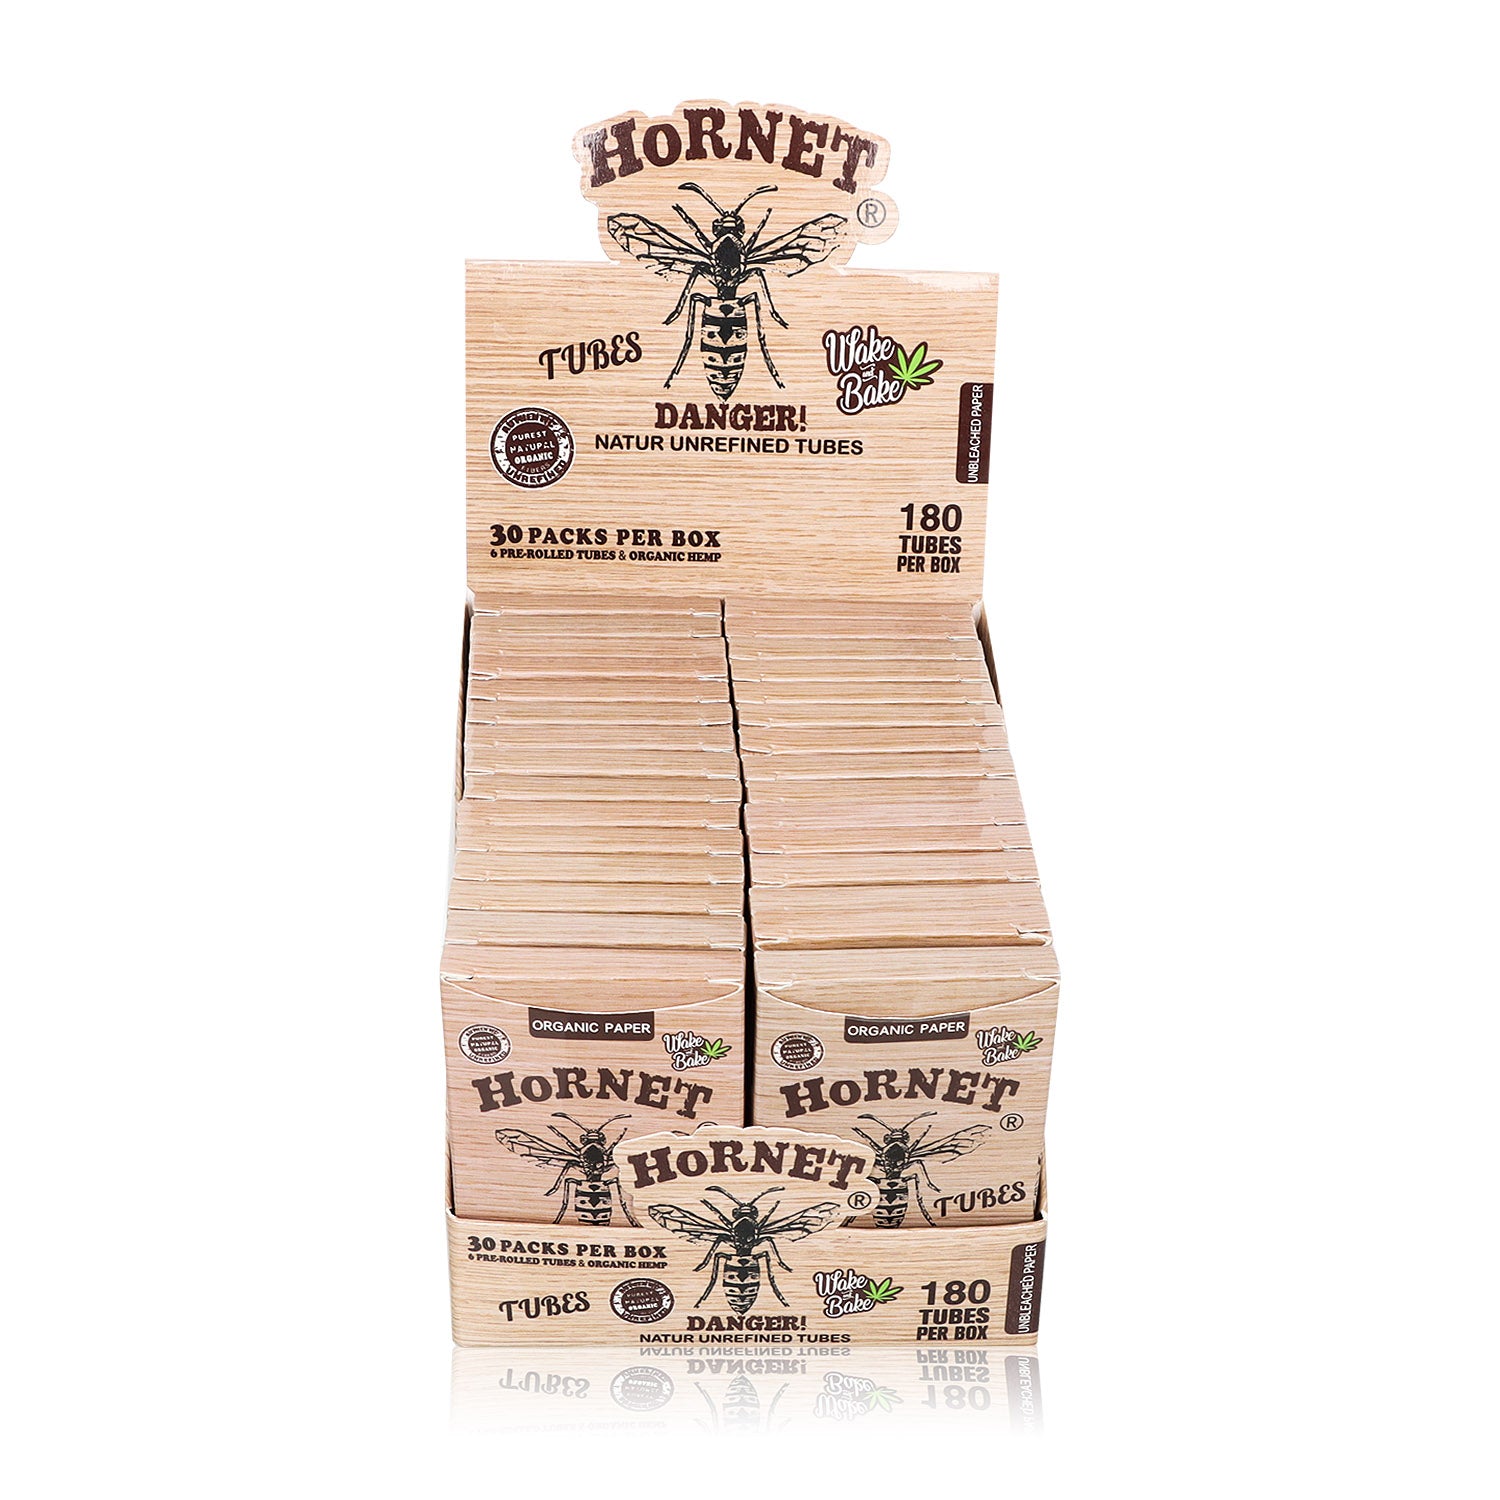 HORNET 84 mm Brown Pre Rolled Cones, Natural Rolling Cones, Slow Burning Pre Rolled Rolling Paper, 6 PCS / Pack 30 Packs / Box